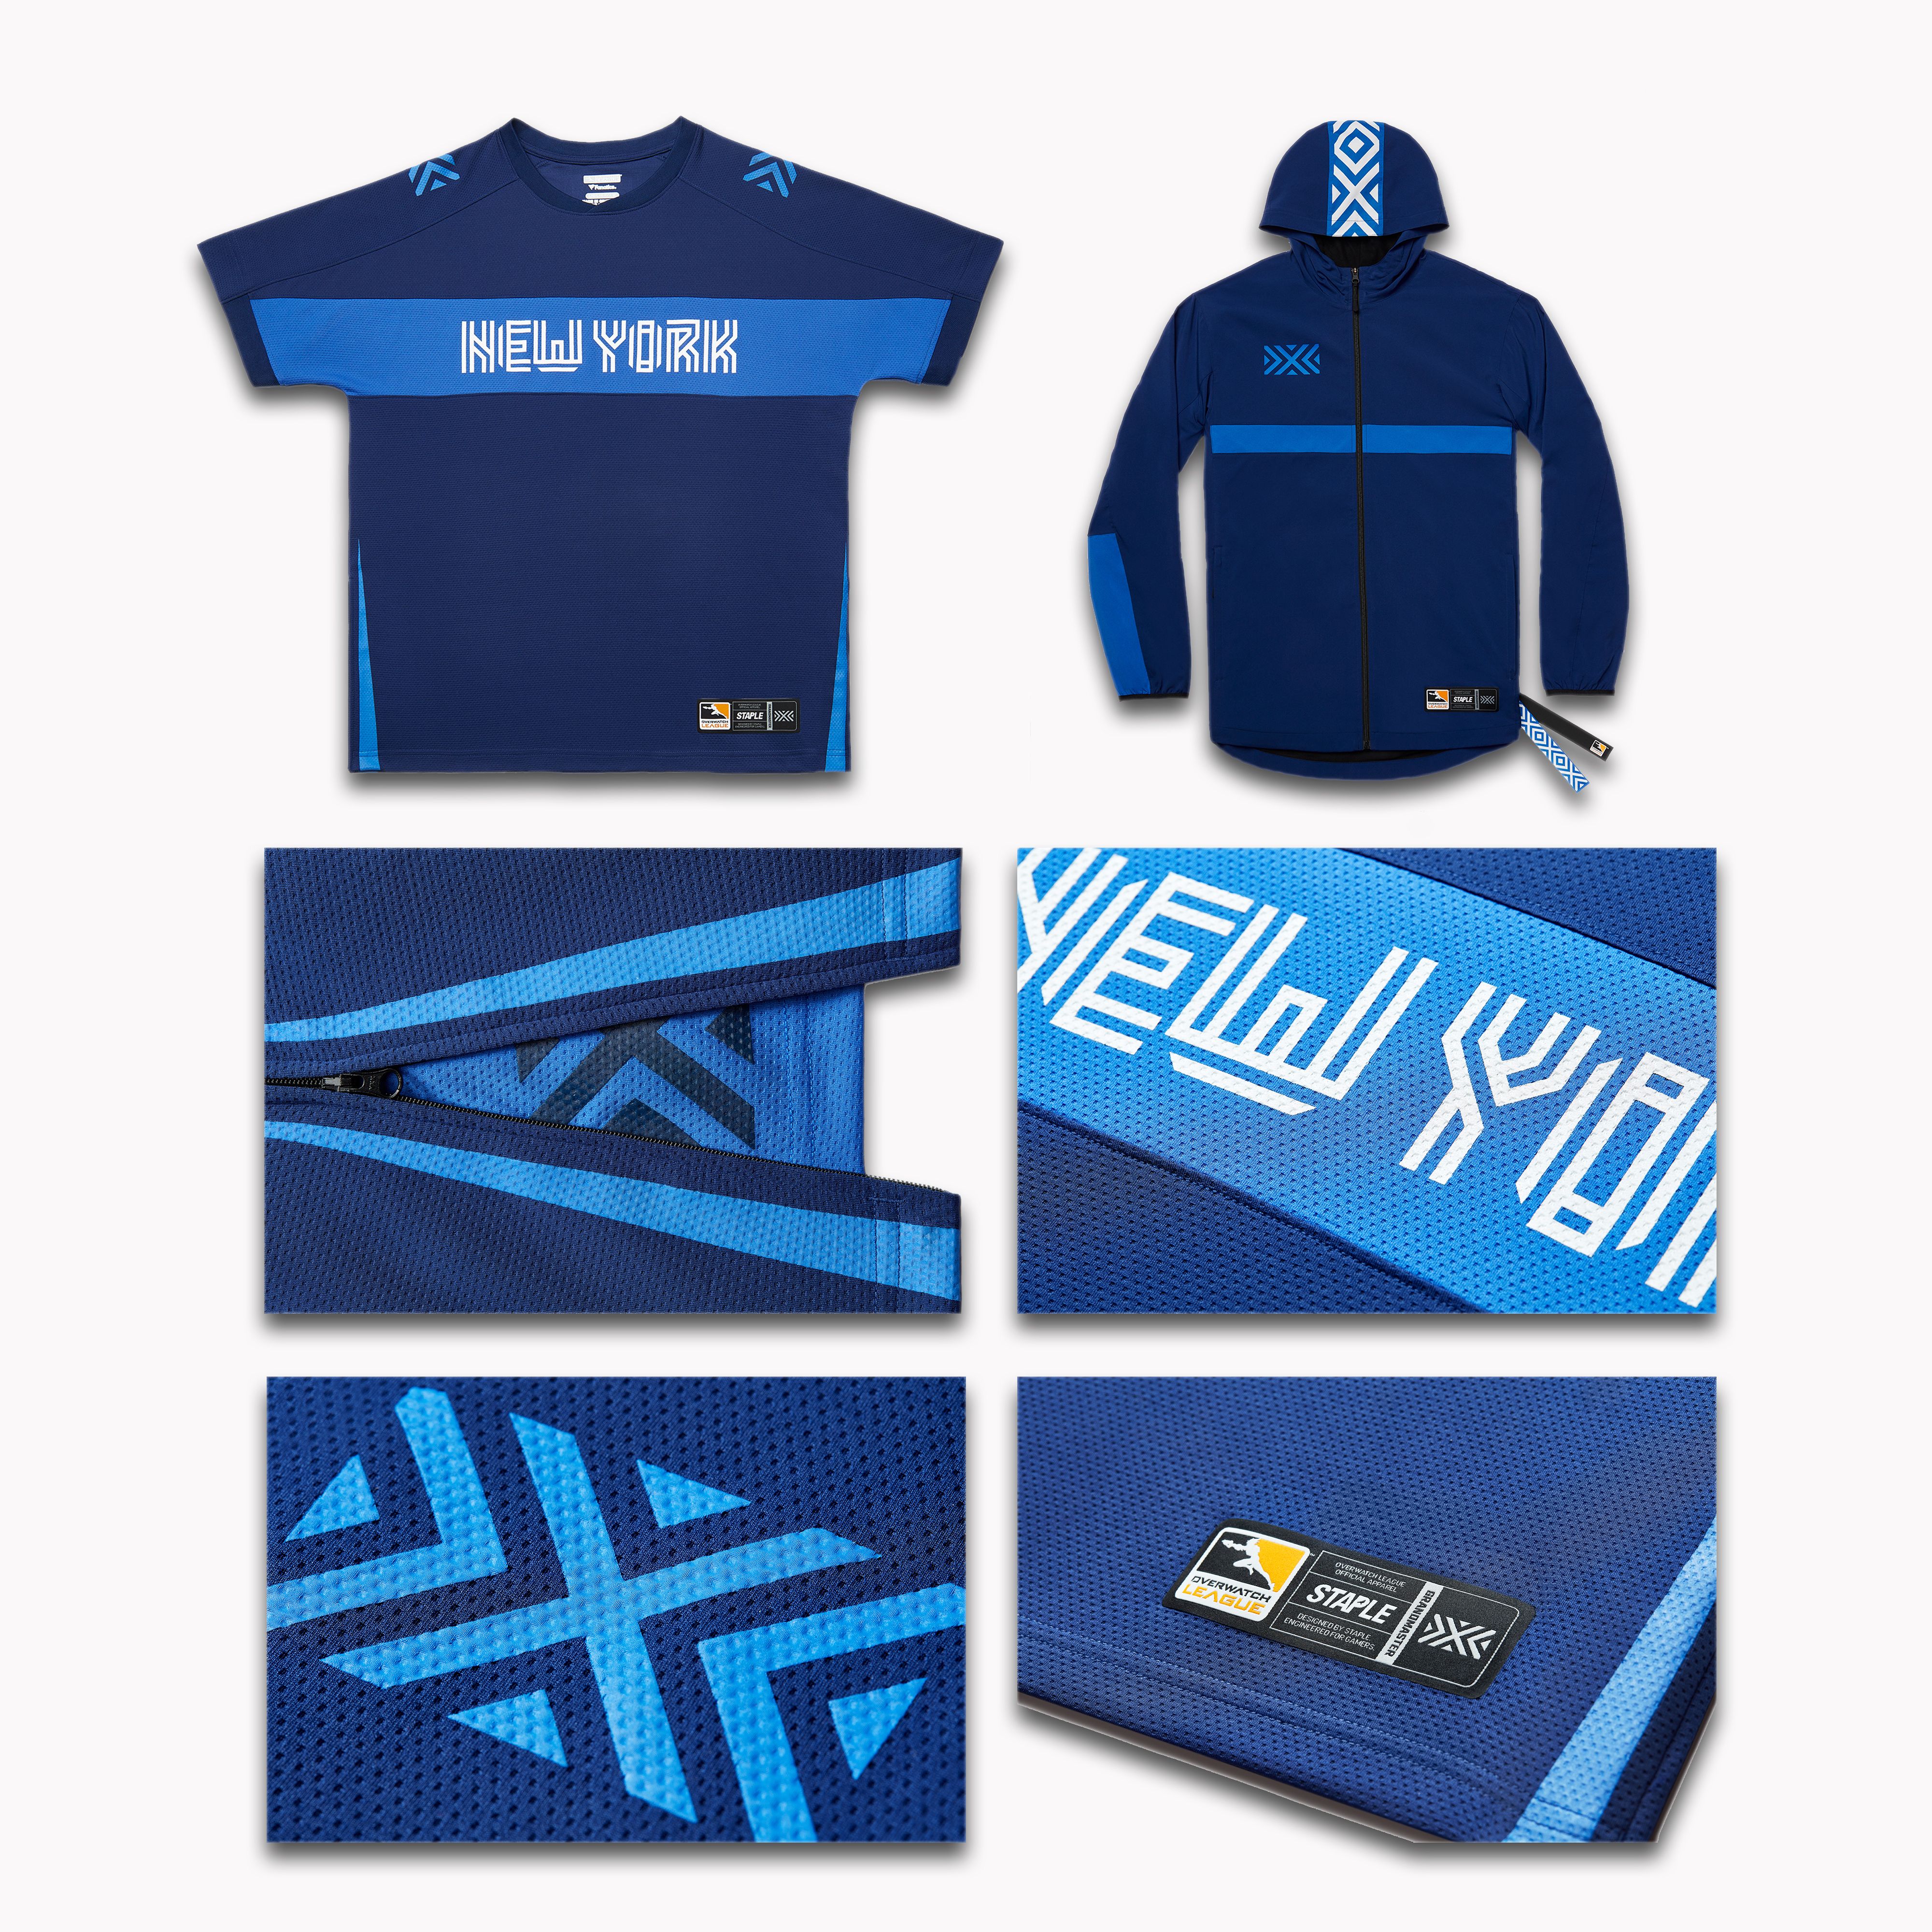 Overwatch League New 2020 Jersey Kits Bring Some Serious Style To Your Wardrobe